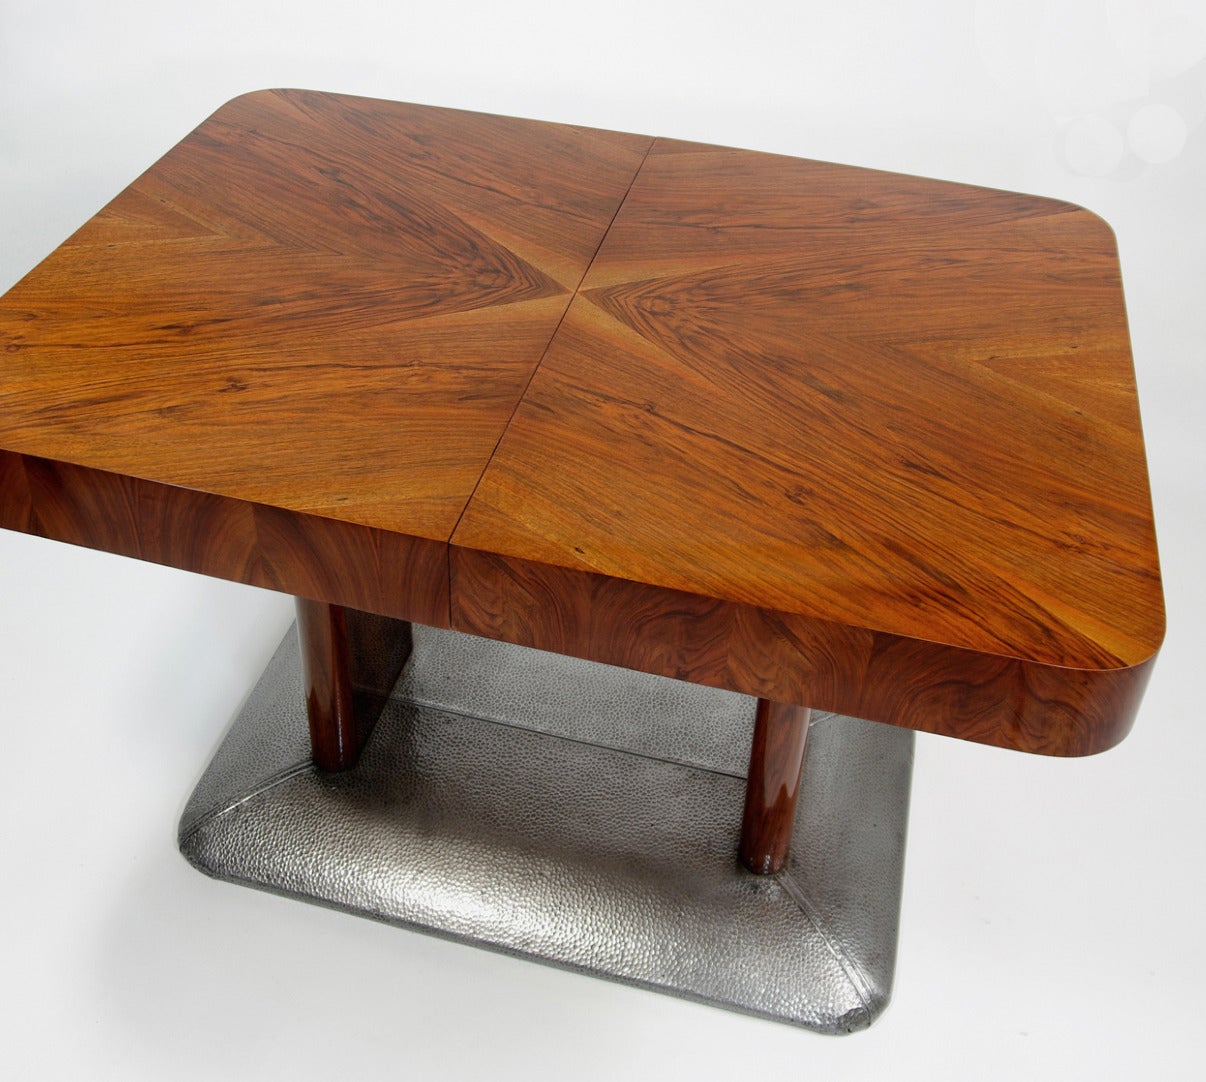 Art deco dining table H-356 by Jindrich Halabala for UP Zavody from about 1930's.
central panel with extension of 580mm. 
The material is a combination of solid wood and walnut veneer. 
Table top has a thickness of 100 mm. Two distinctive